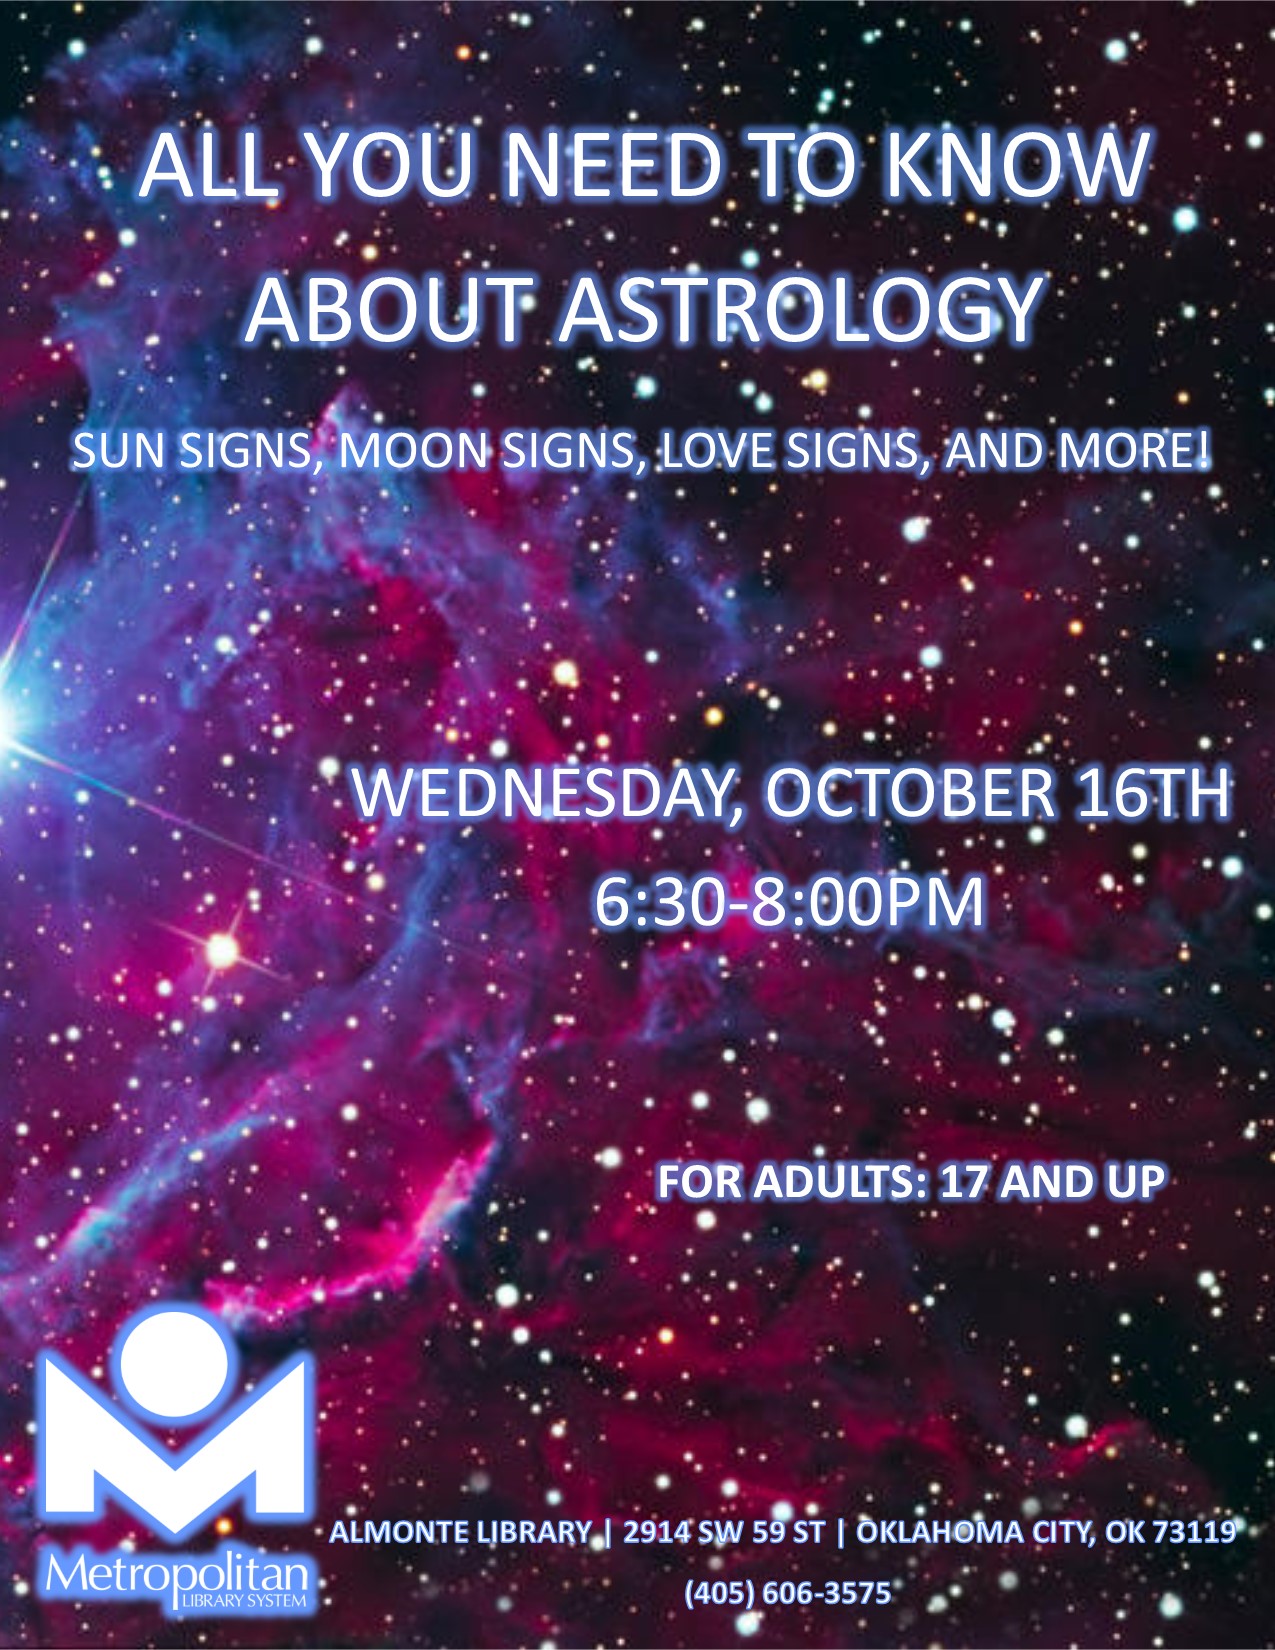 ALL YOU NEED TO KNOW ABOUT ASTROLOGY!